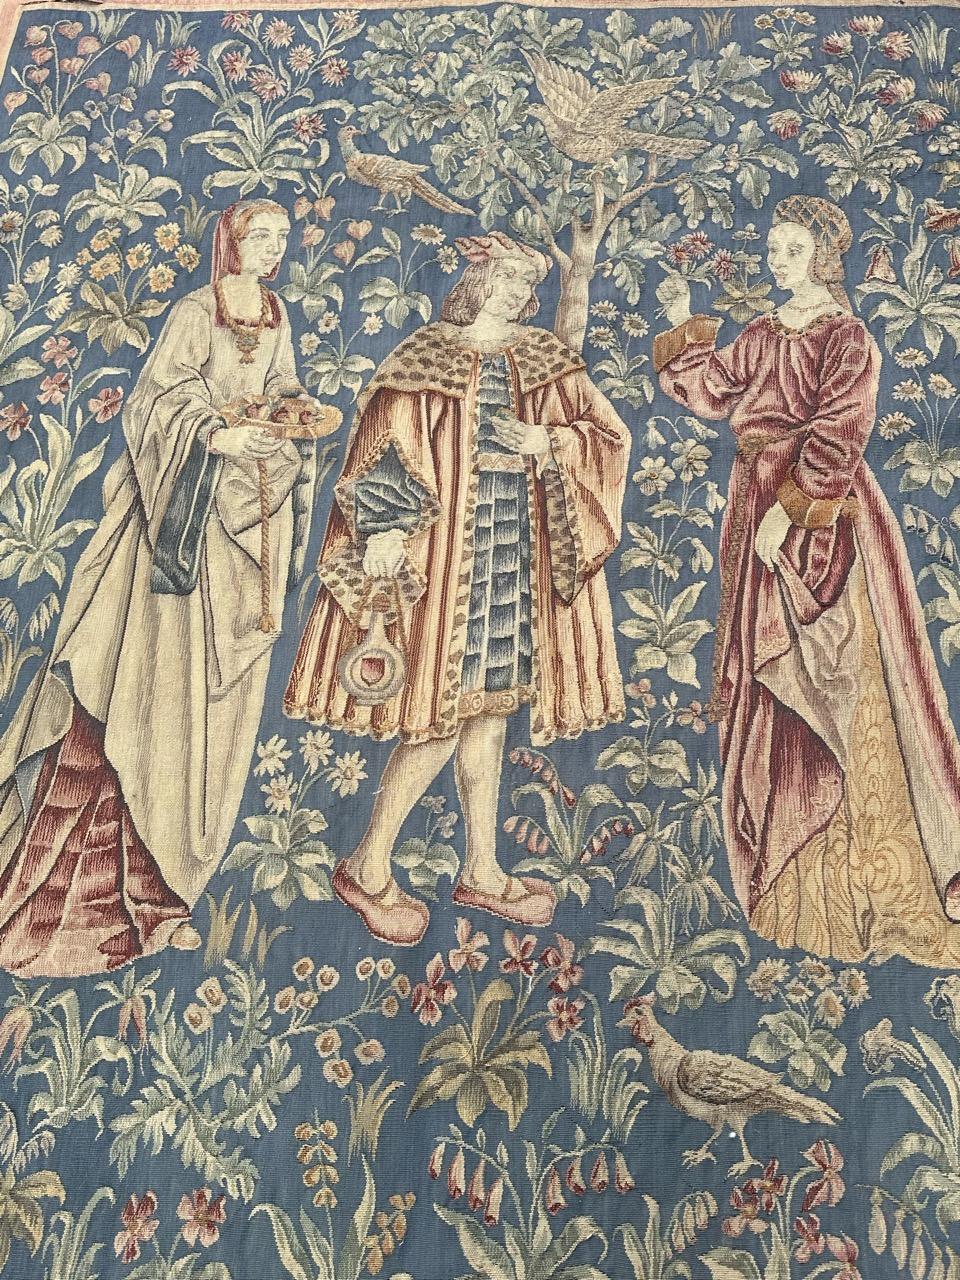 Very beautiful and Aubusson tapestry with a nice design featuring a part of the design of a medieval tapestry at a museum in Paris « La promenade » the promenade, a tapestry from the series of tapestries of seigneurial life, representing noble